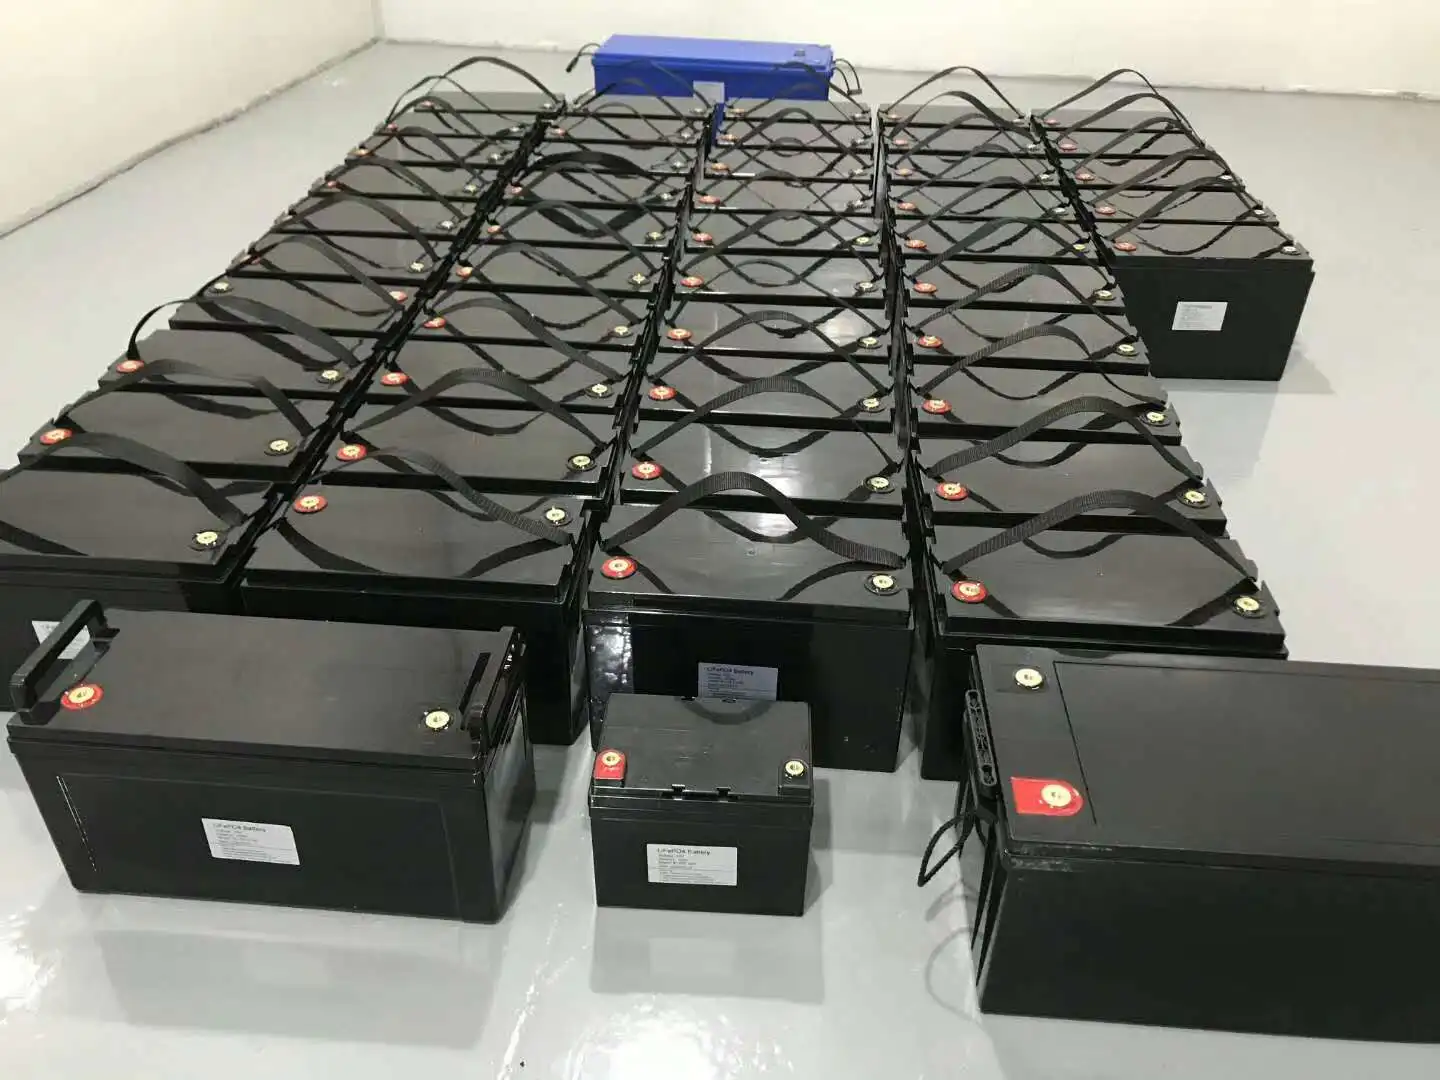 Economically and conveniently scooter electric battery 48v 60ah 70ah 80ah 90ah